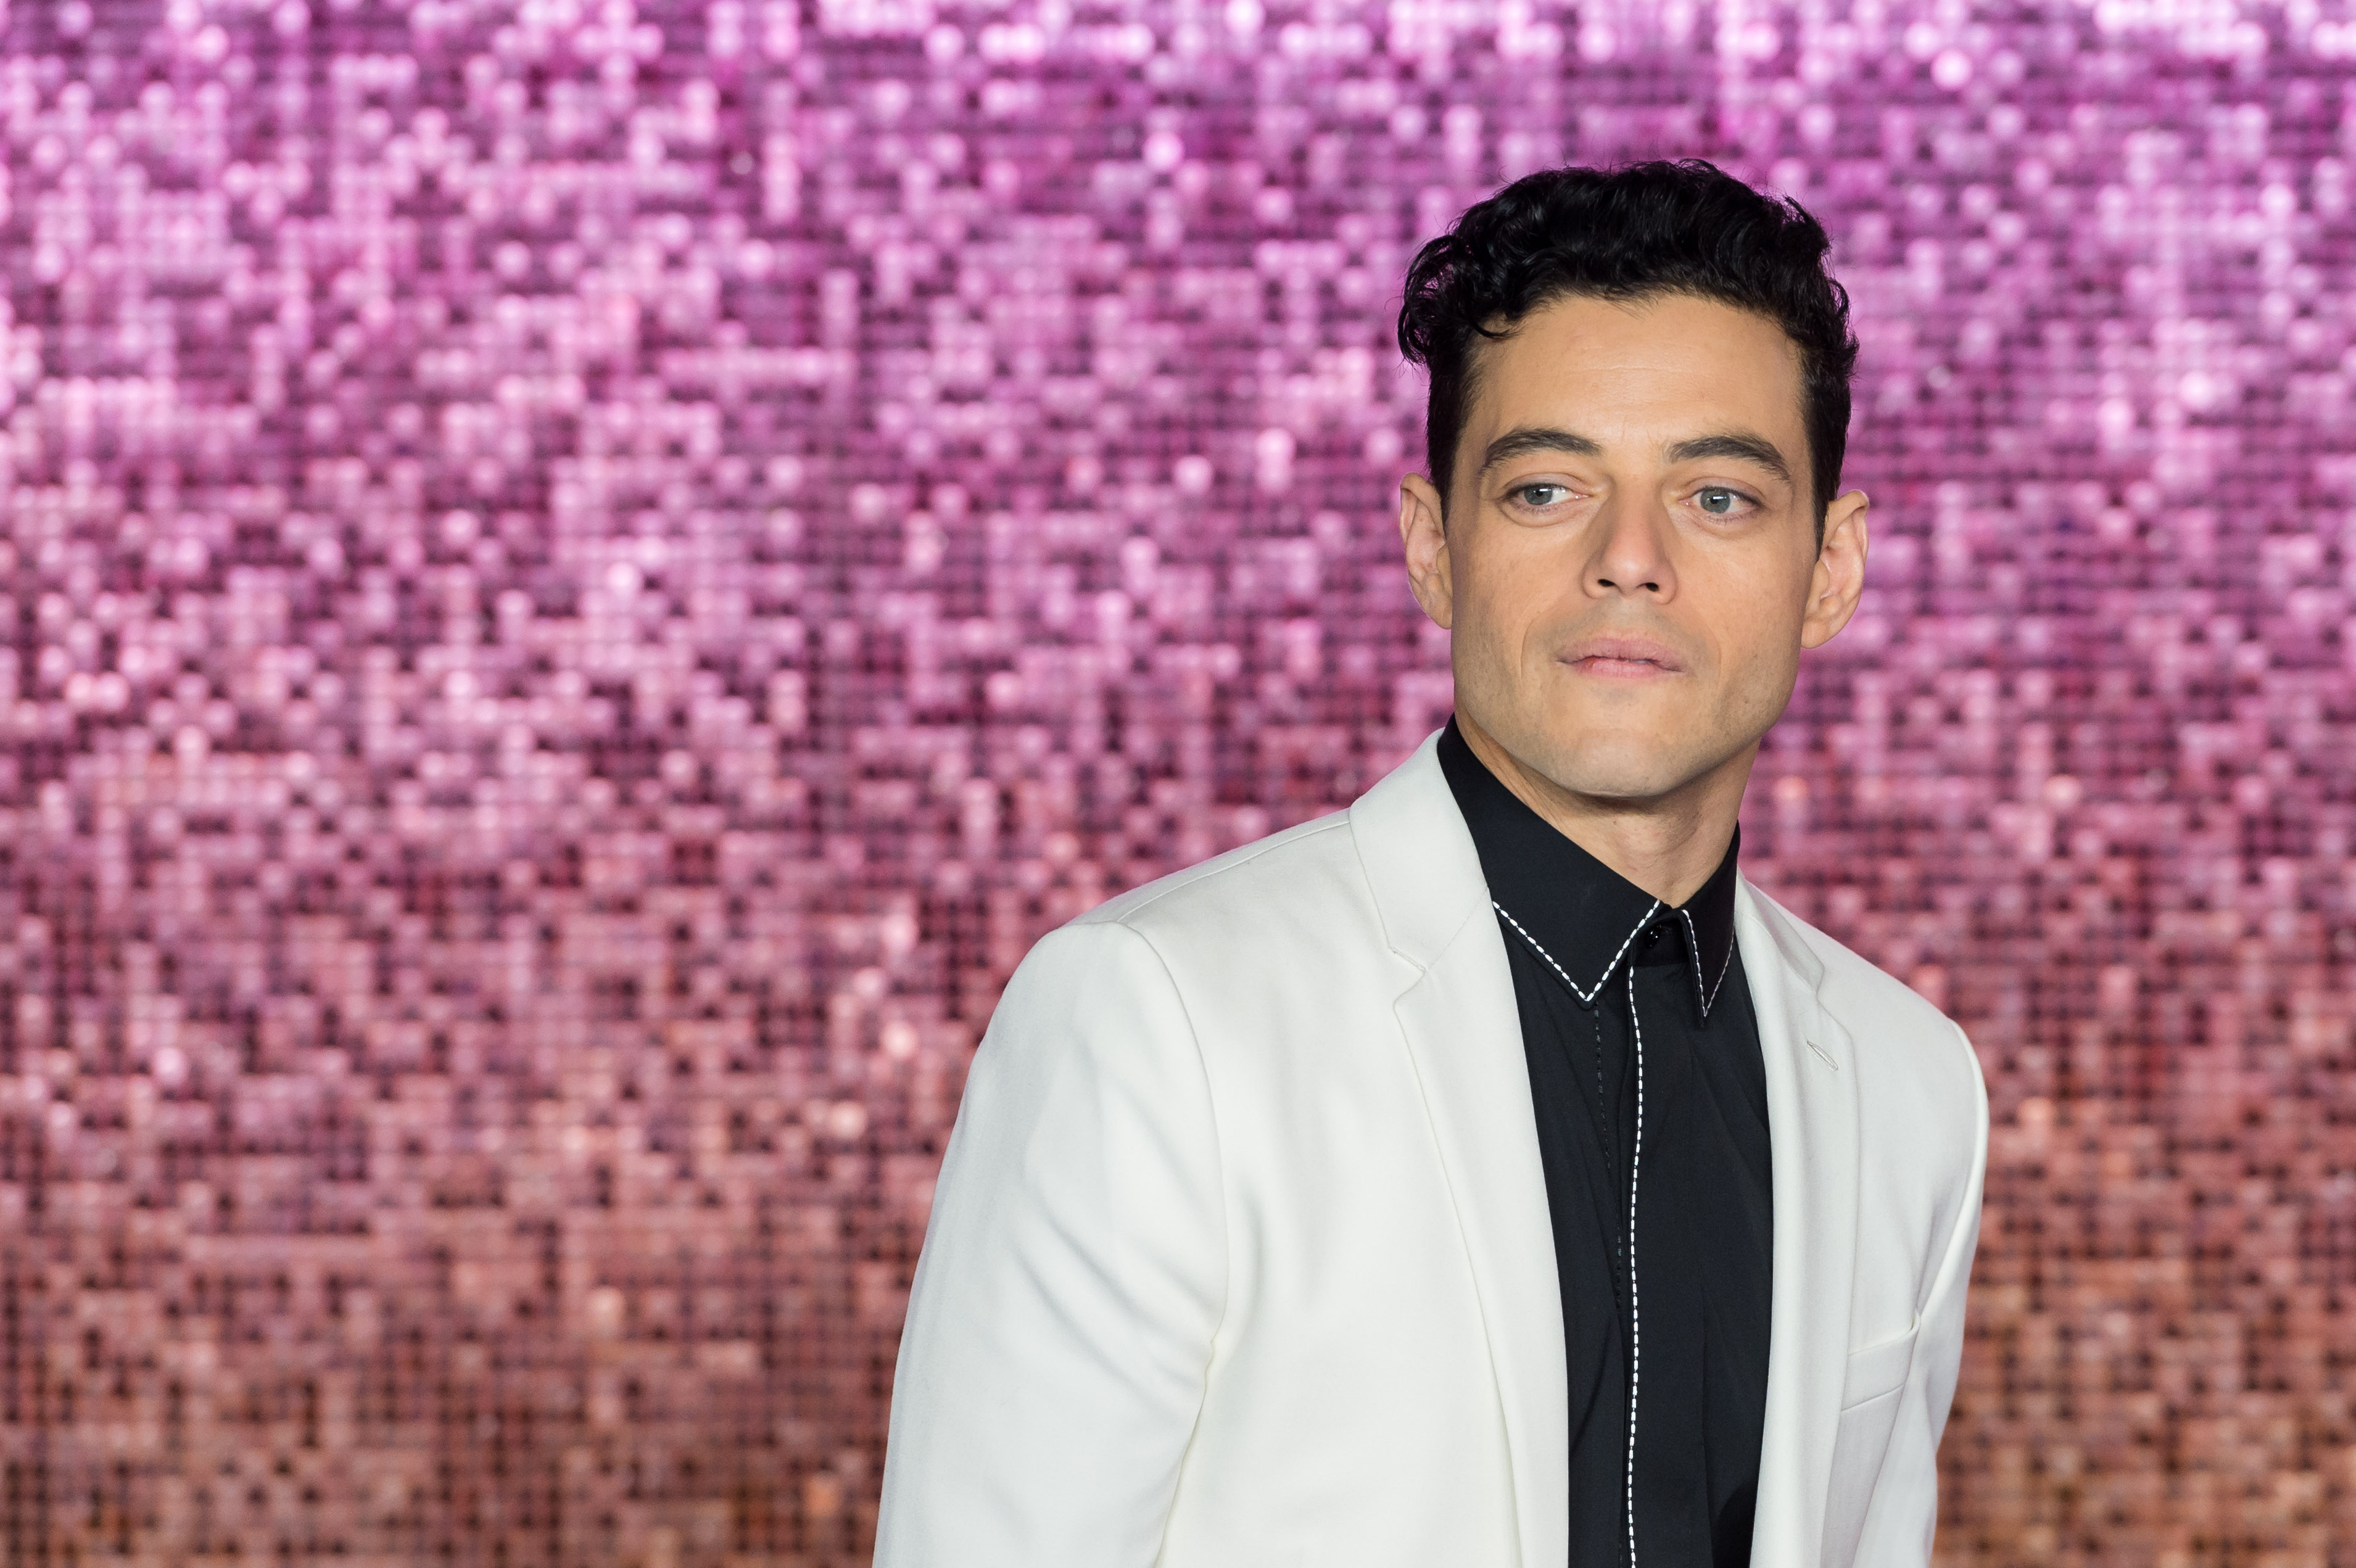 Rami Malek at the World Premiere of "Bohemian Rhapsody" on October 23, 2018 in London, United Kingdom. | Source: Getty Images